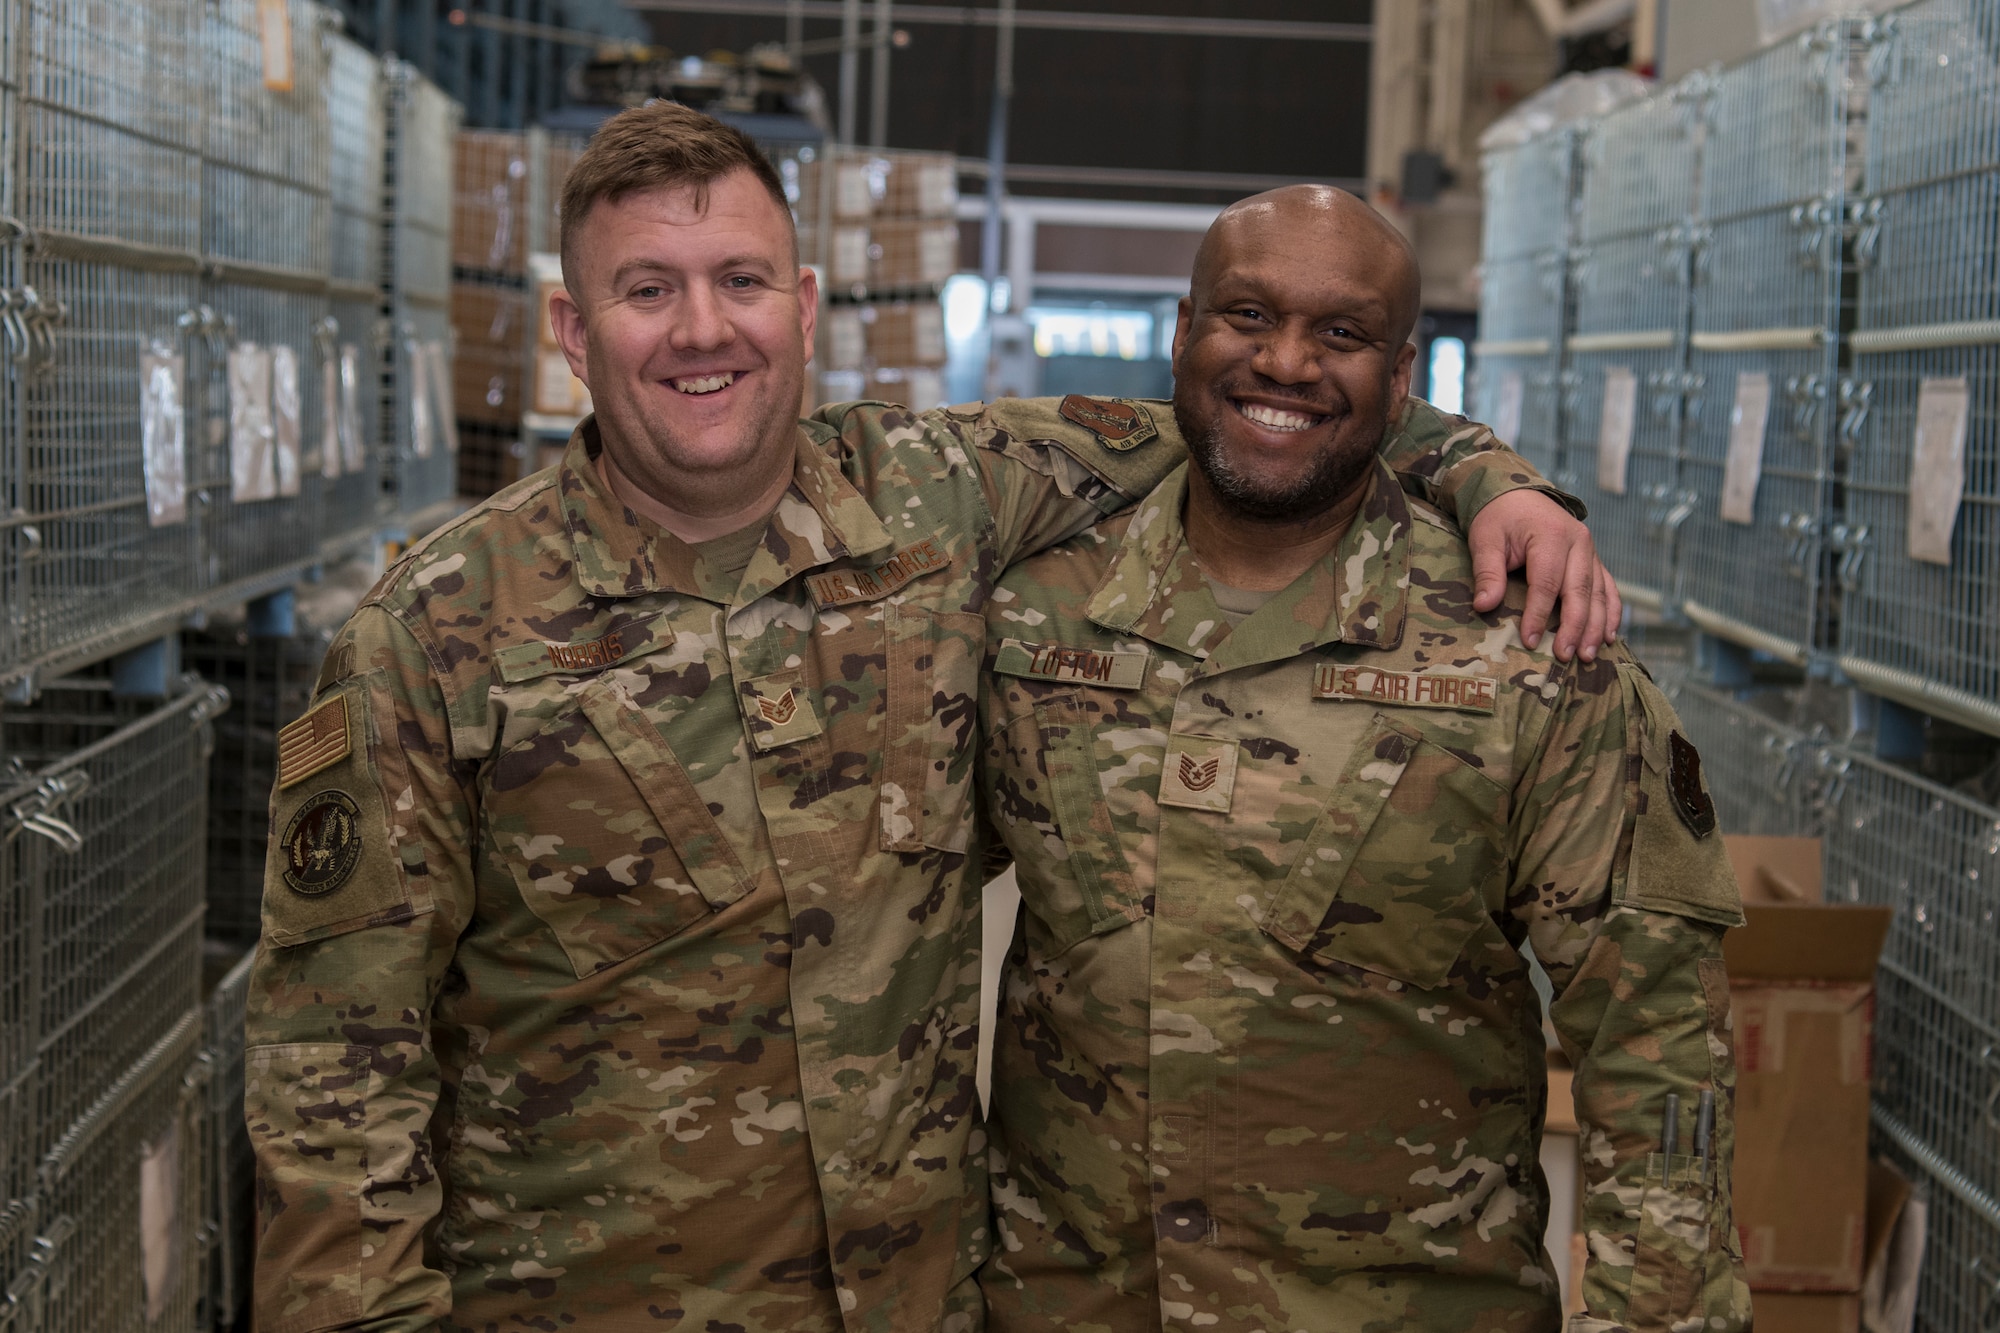 U.S. Air Force Staff Sgt. Zach Norris, and U.S. Air Force Tech Sgt. Javonte Lofton from the Logistic Readiness Squadron